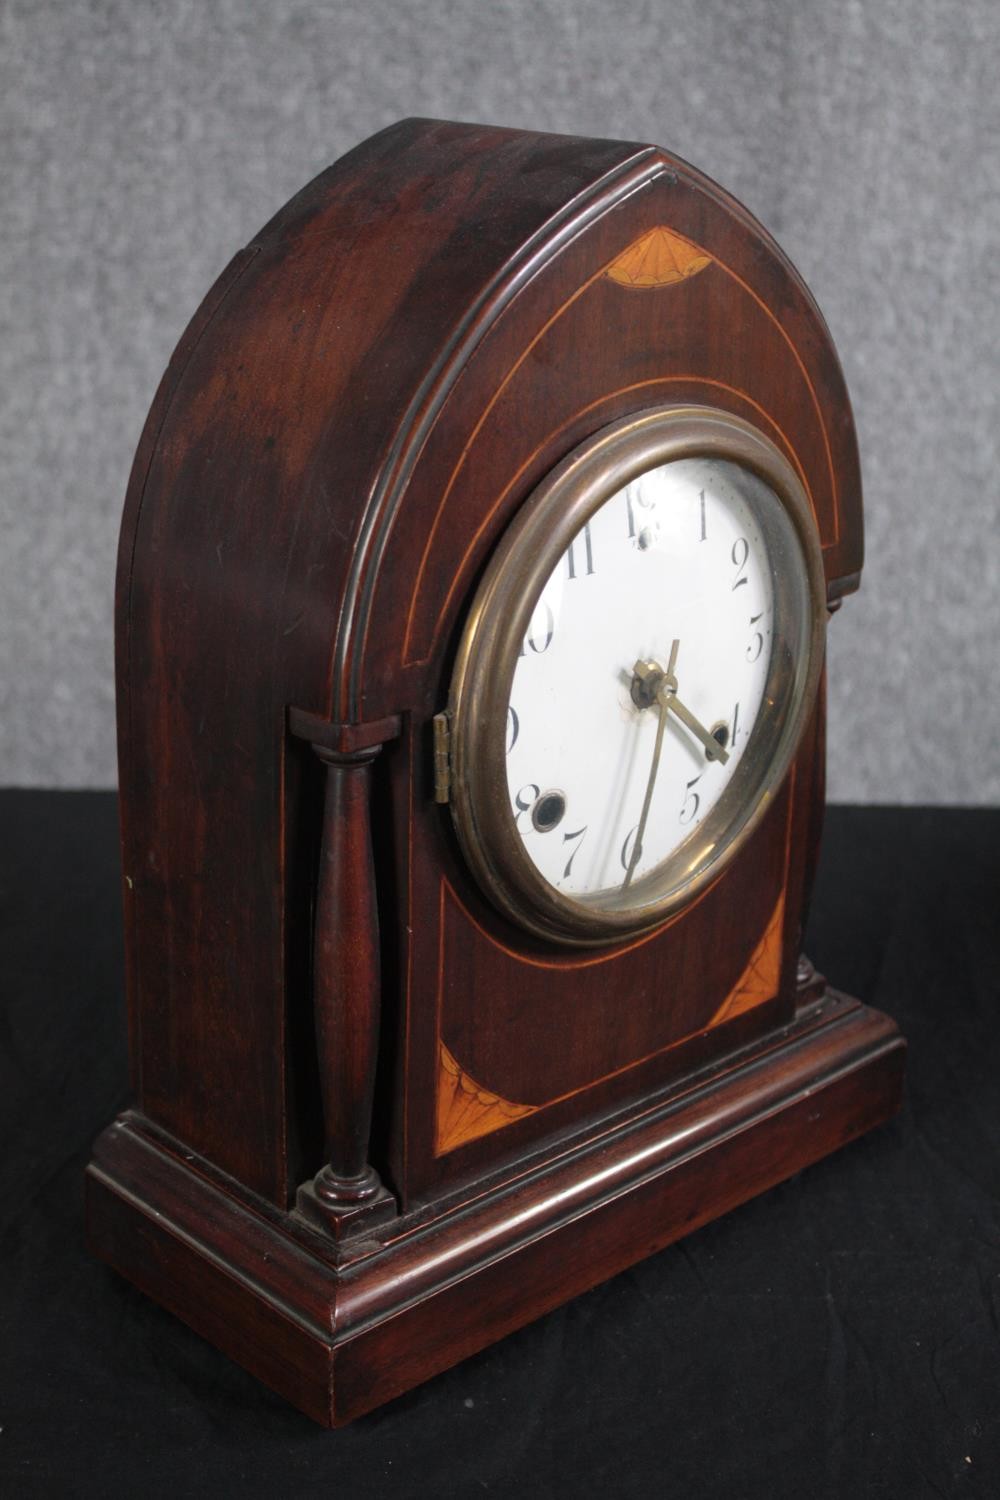 An Edwardian mahogany and satinwood mantel clock with a replacement modern movement. H.38 W.28 D. - Image 3 of 5